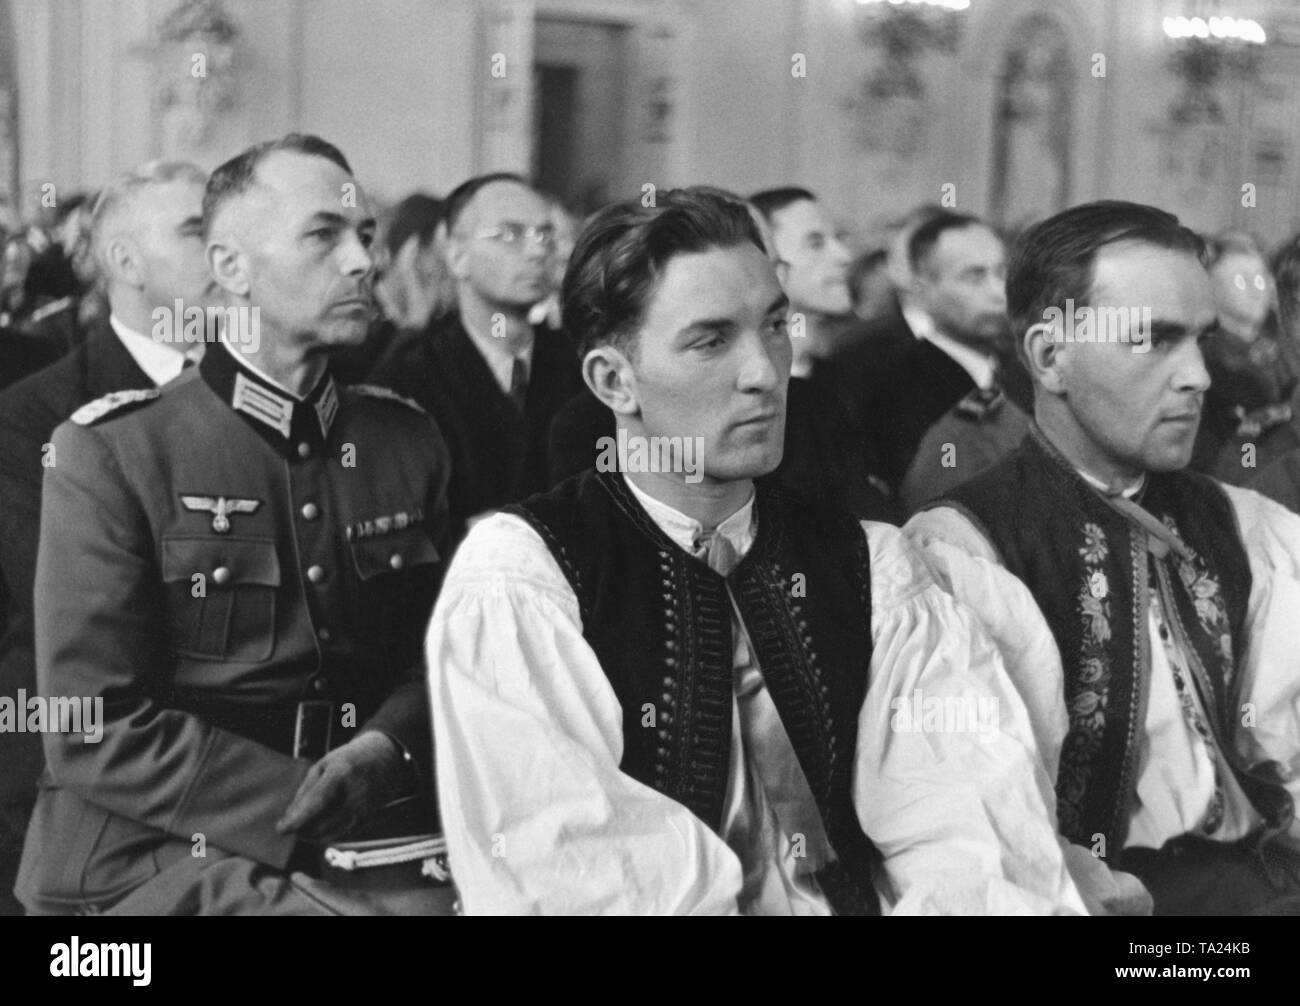 Assembly of the Protectorate of Bohemia and Moravia in Prague. The men wear Sudeten German costumes and uniforms of the Werhmacht. Since March 1939, the areas of Bohemia and Moravia had been under German occupation. Stock Photo